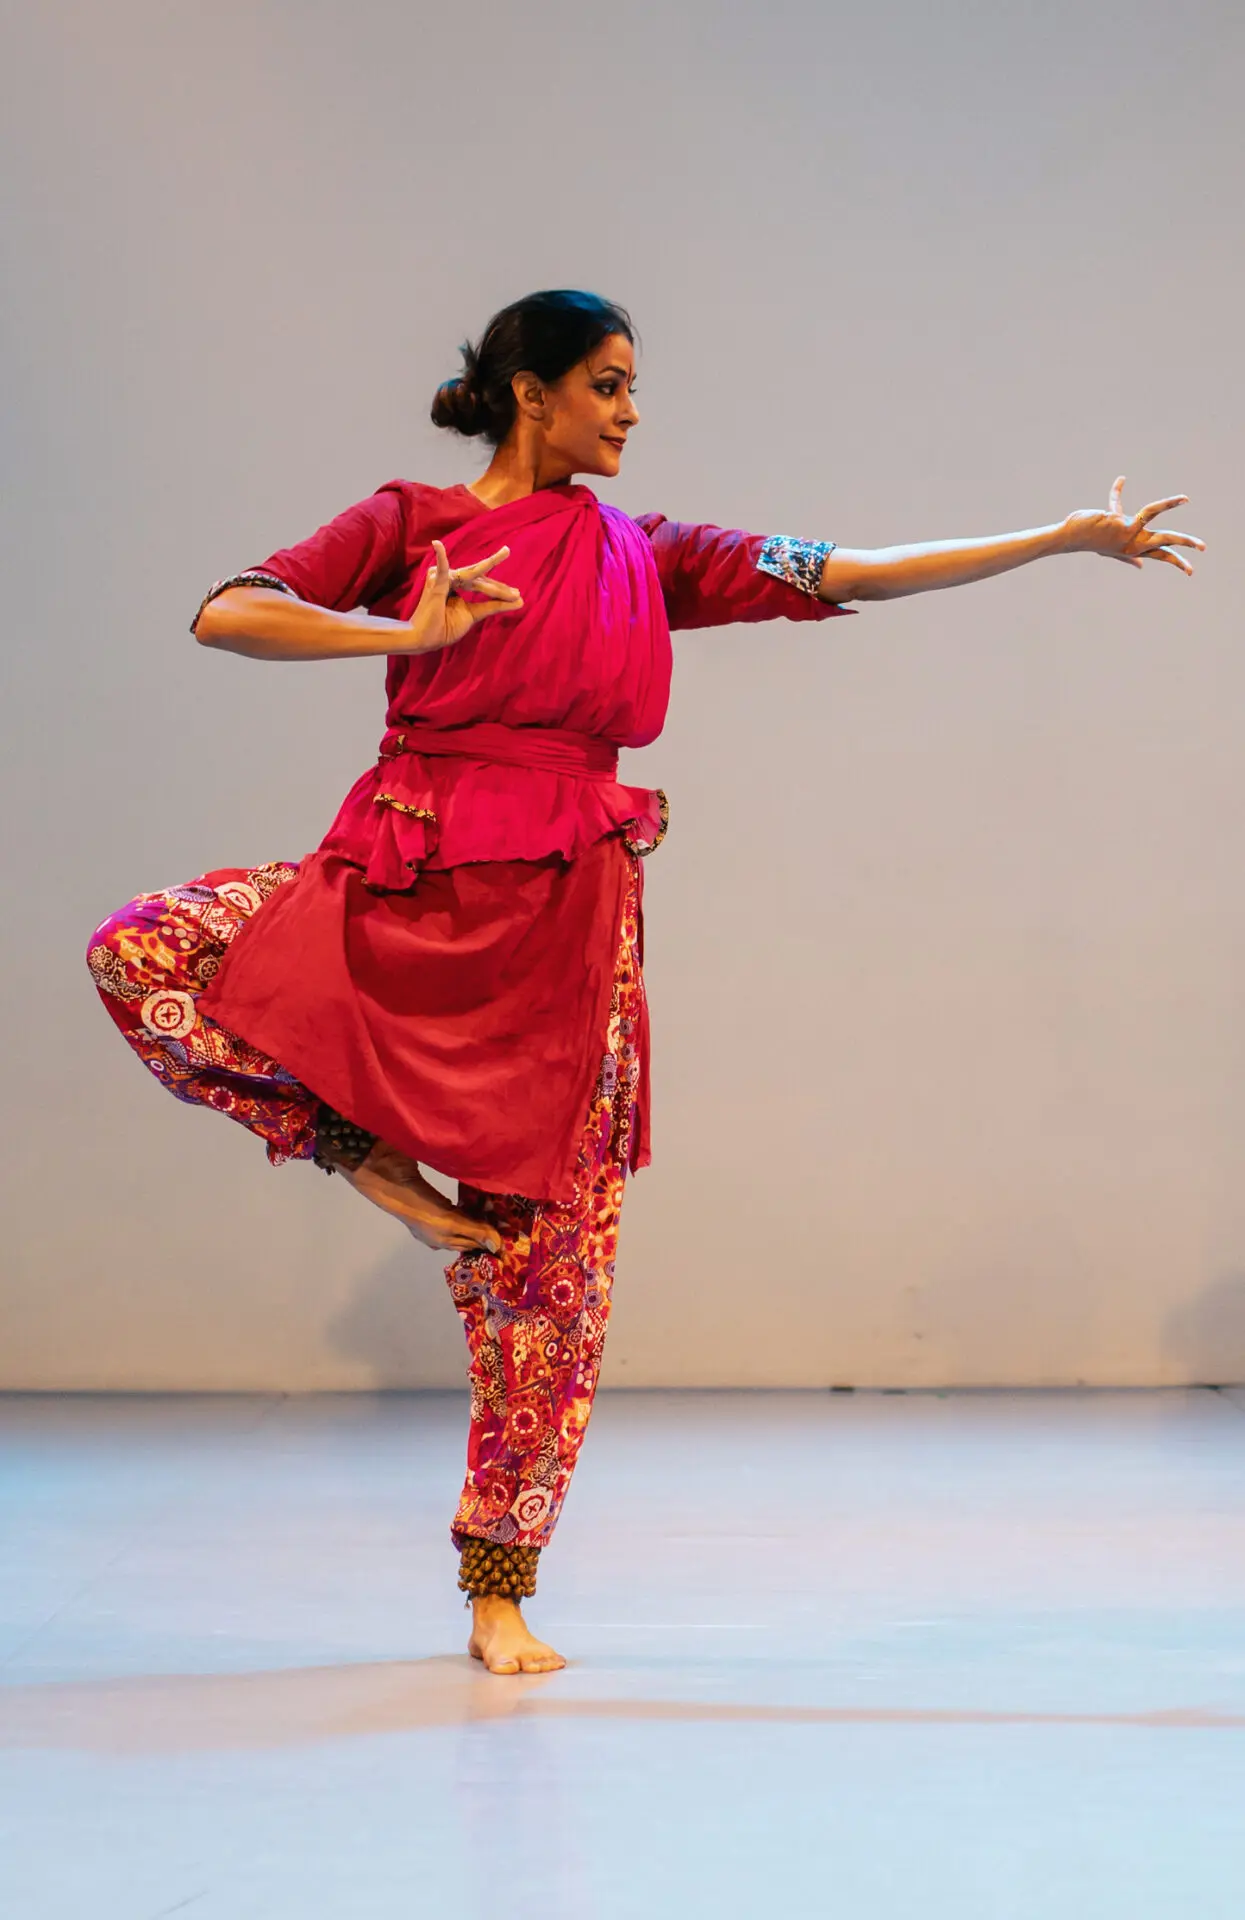 Srivalli performs classical Indian dance.